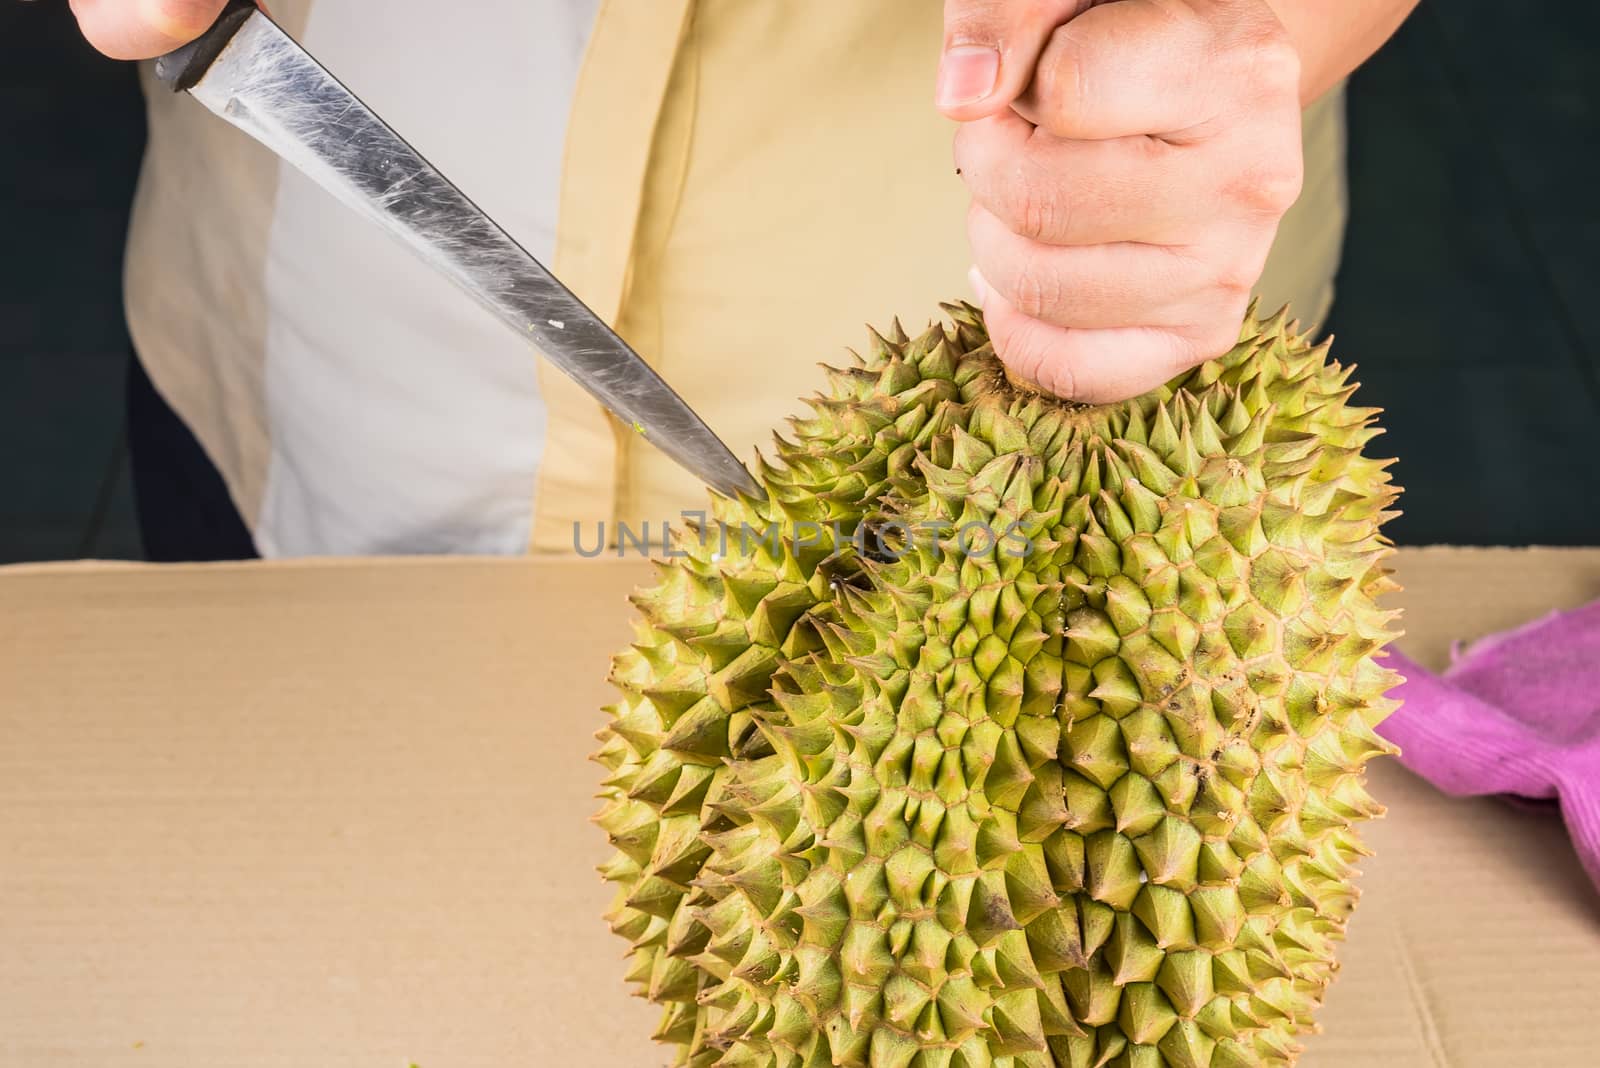 Woman cutting a Durian fruit on the wooden table by using a knife close up. Durian is the one of popular fruit in Thailand.